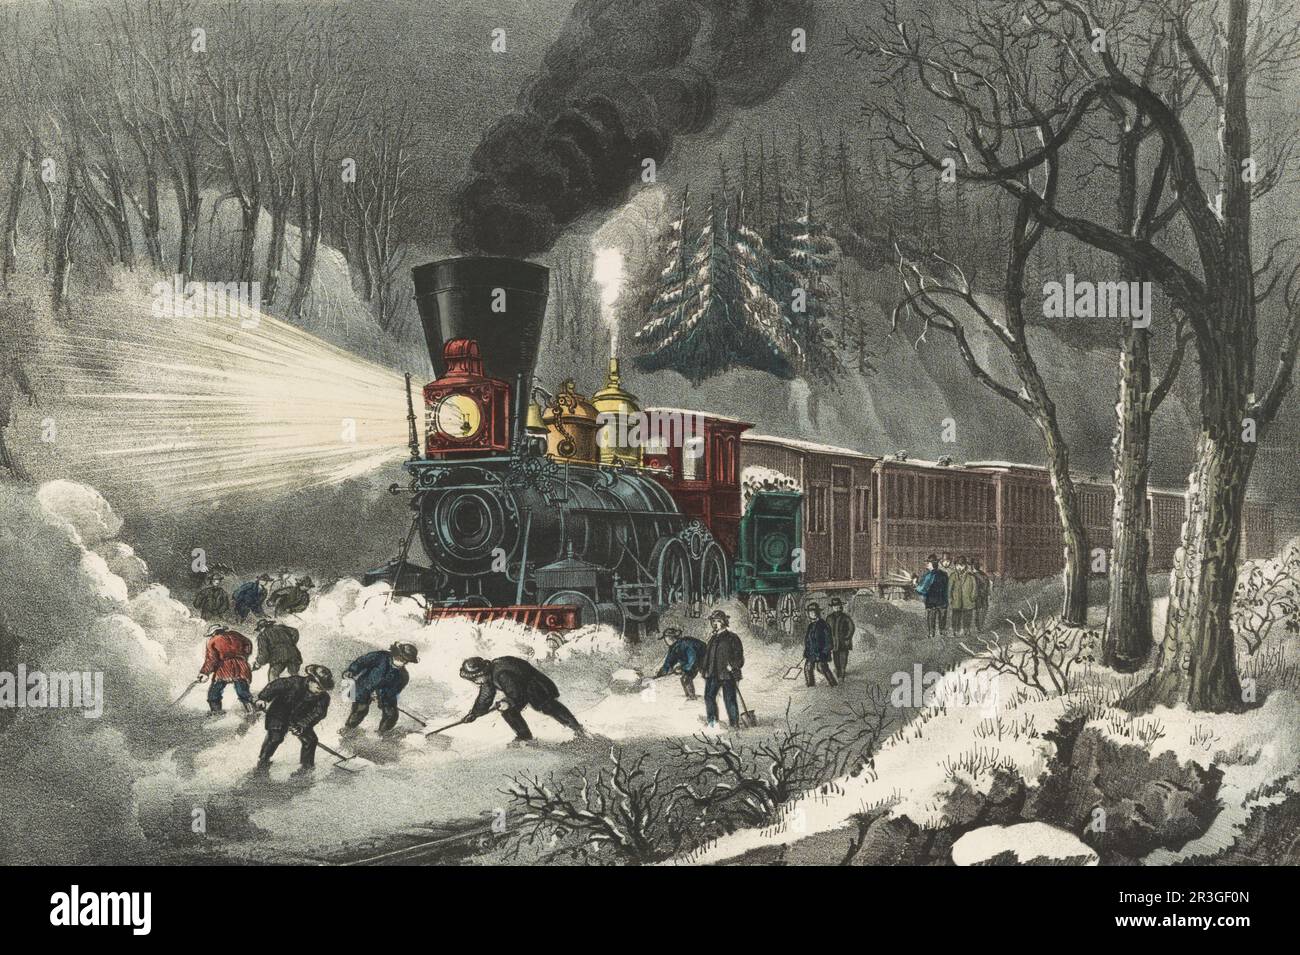 A passenger train stopped on the tracks while men shovel snow off tracks ahead, circa 1871. Stock Photo